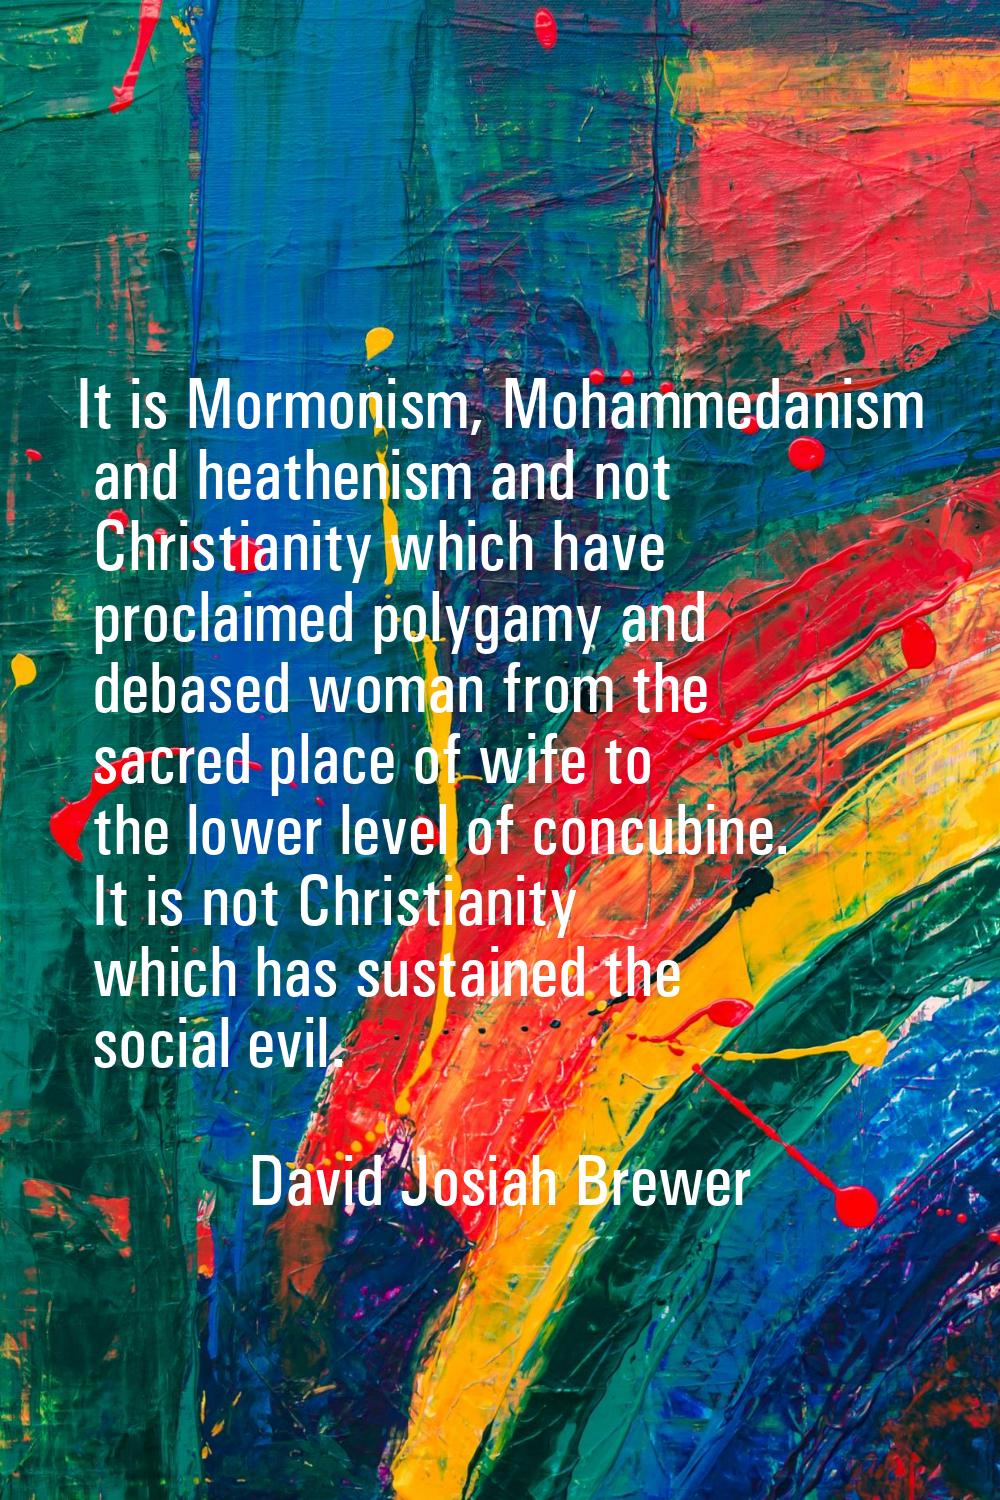 It is Mormonism, Mohammedanism and heathenism and not Christianity which have proclaimed polygamy a